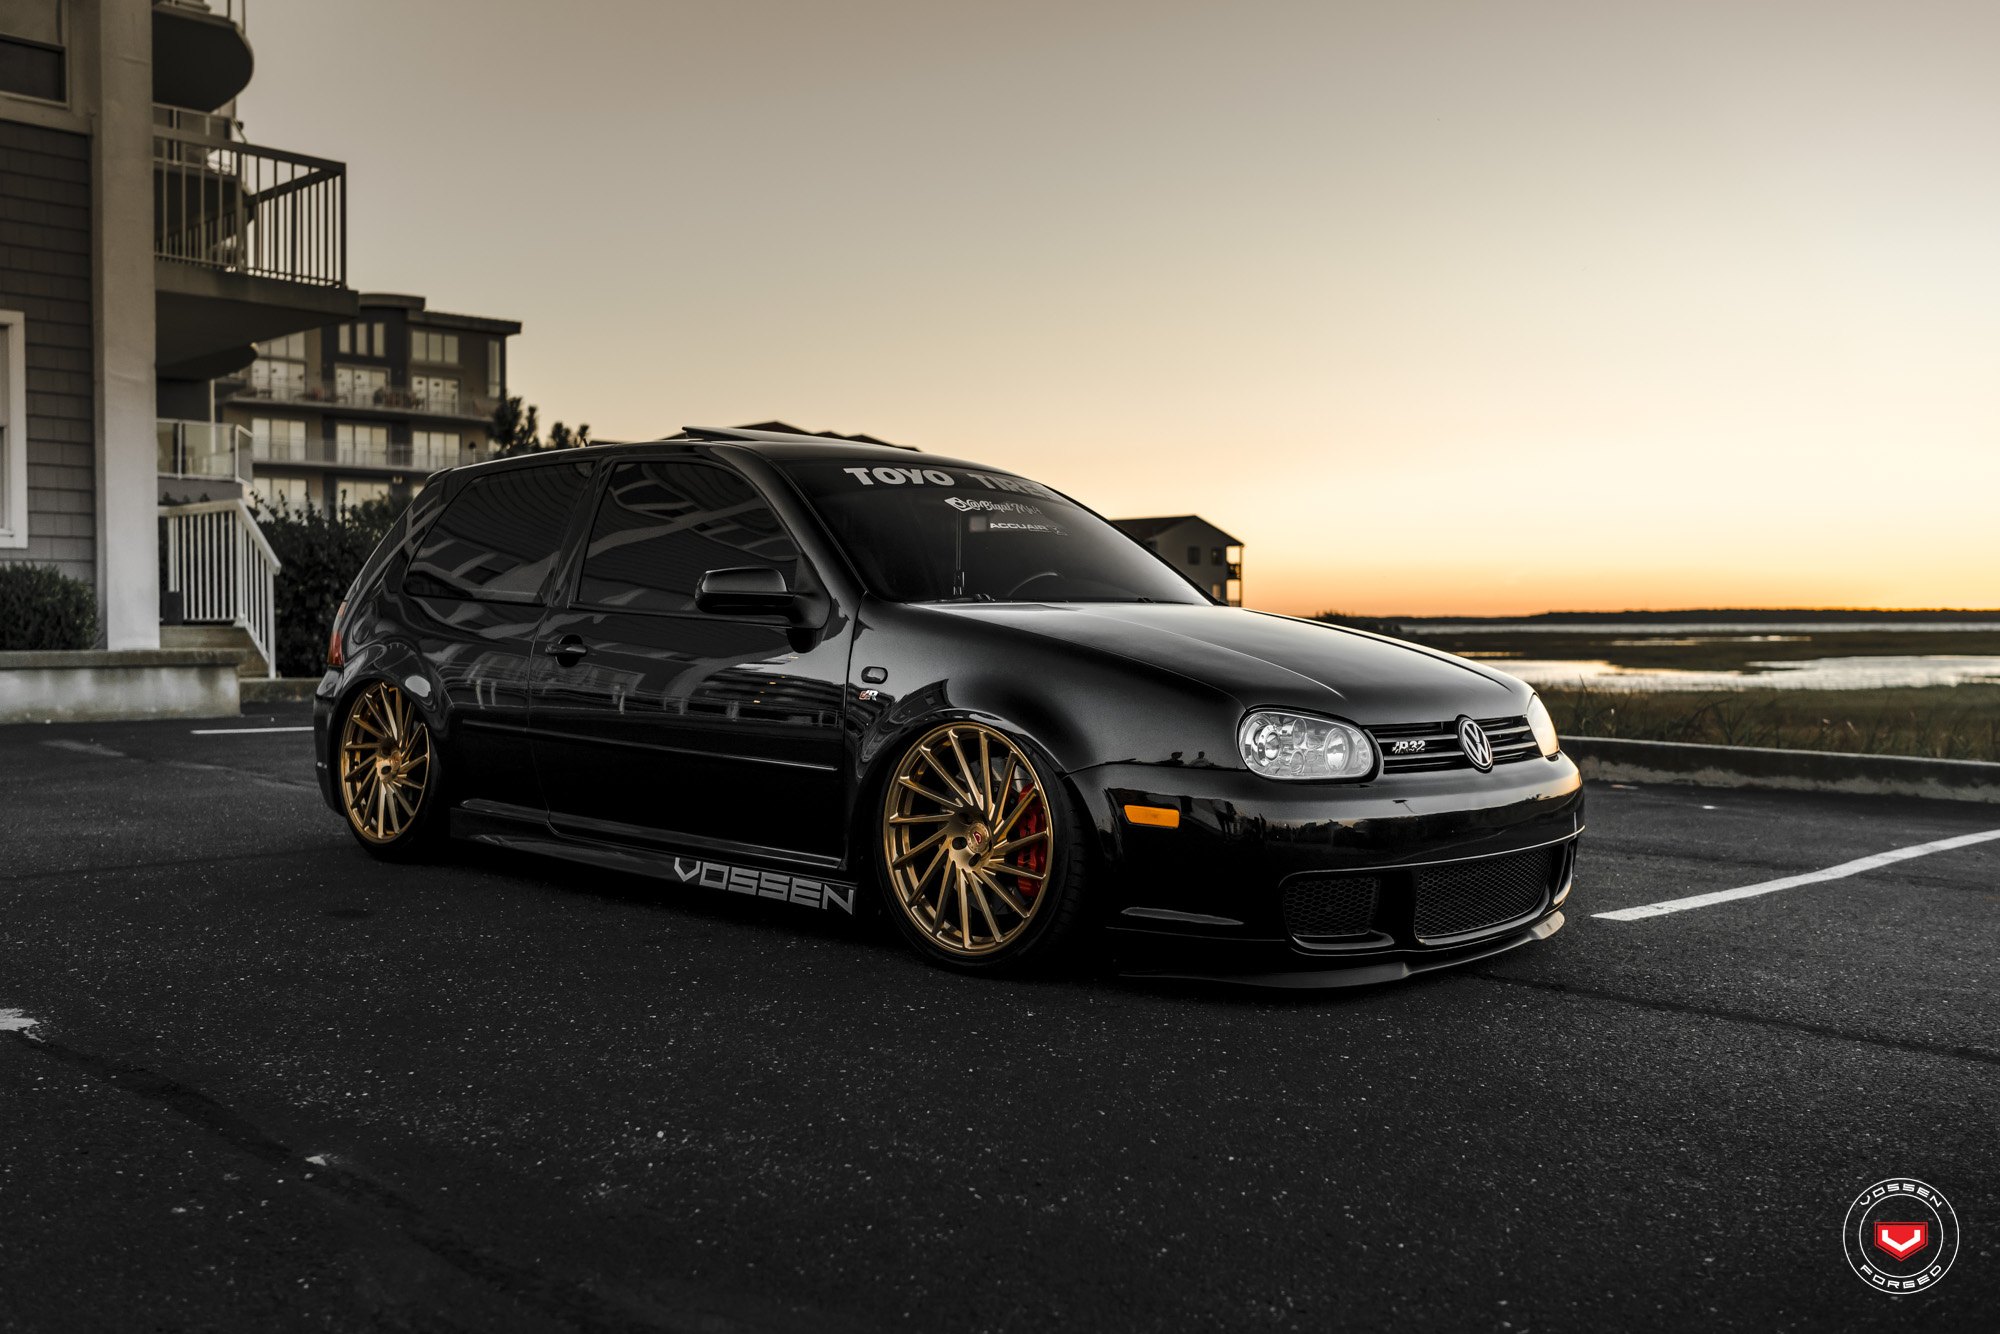 Black VW Golf GTI with Crystal Clear Headlights - Photo by Vossen